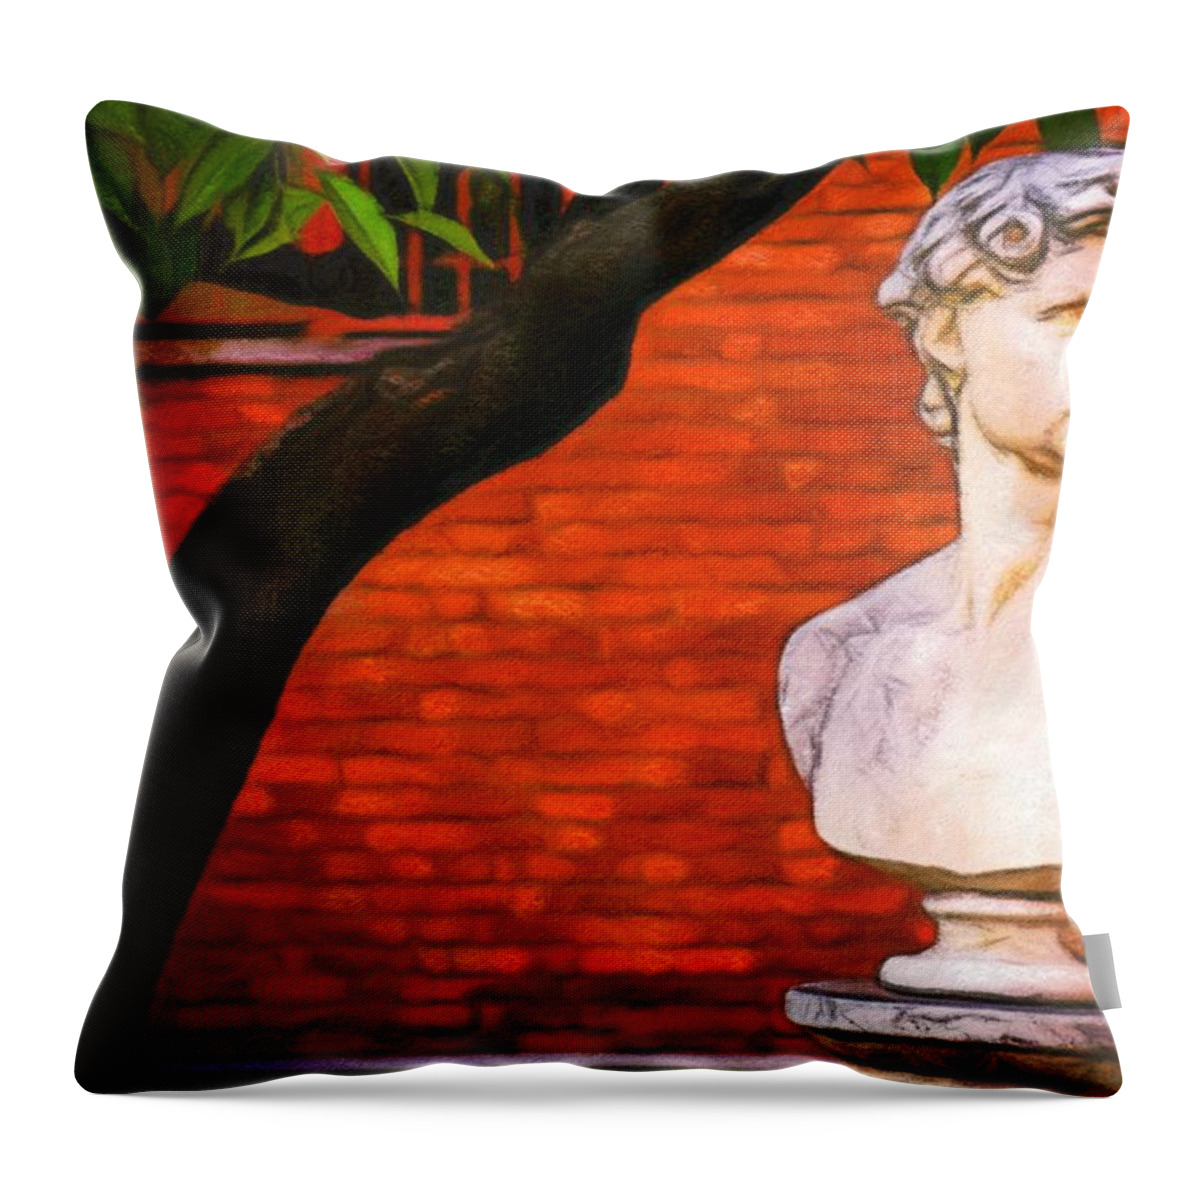 Pastel Throw Pillow featuring the digital art Roman bust, Loyola University Chicago by Vincent Monozlay